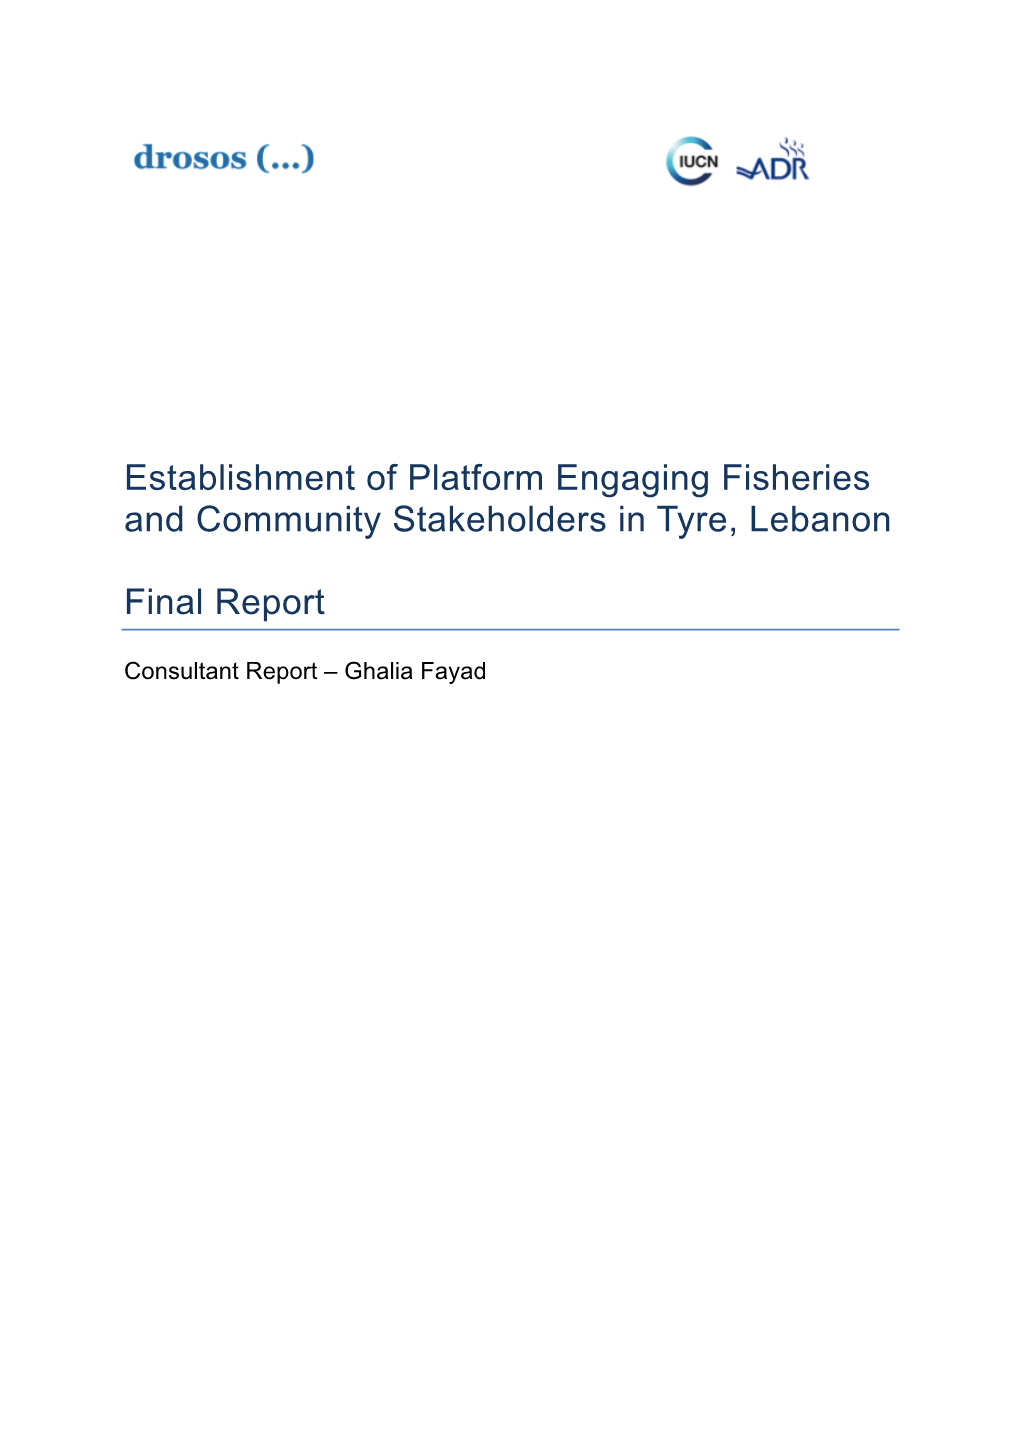 Establishment of Platform Engaging Fisheries and Community Stakeholders in Tyre, Lebanon Final Report